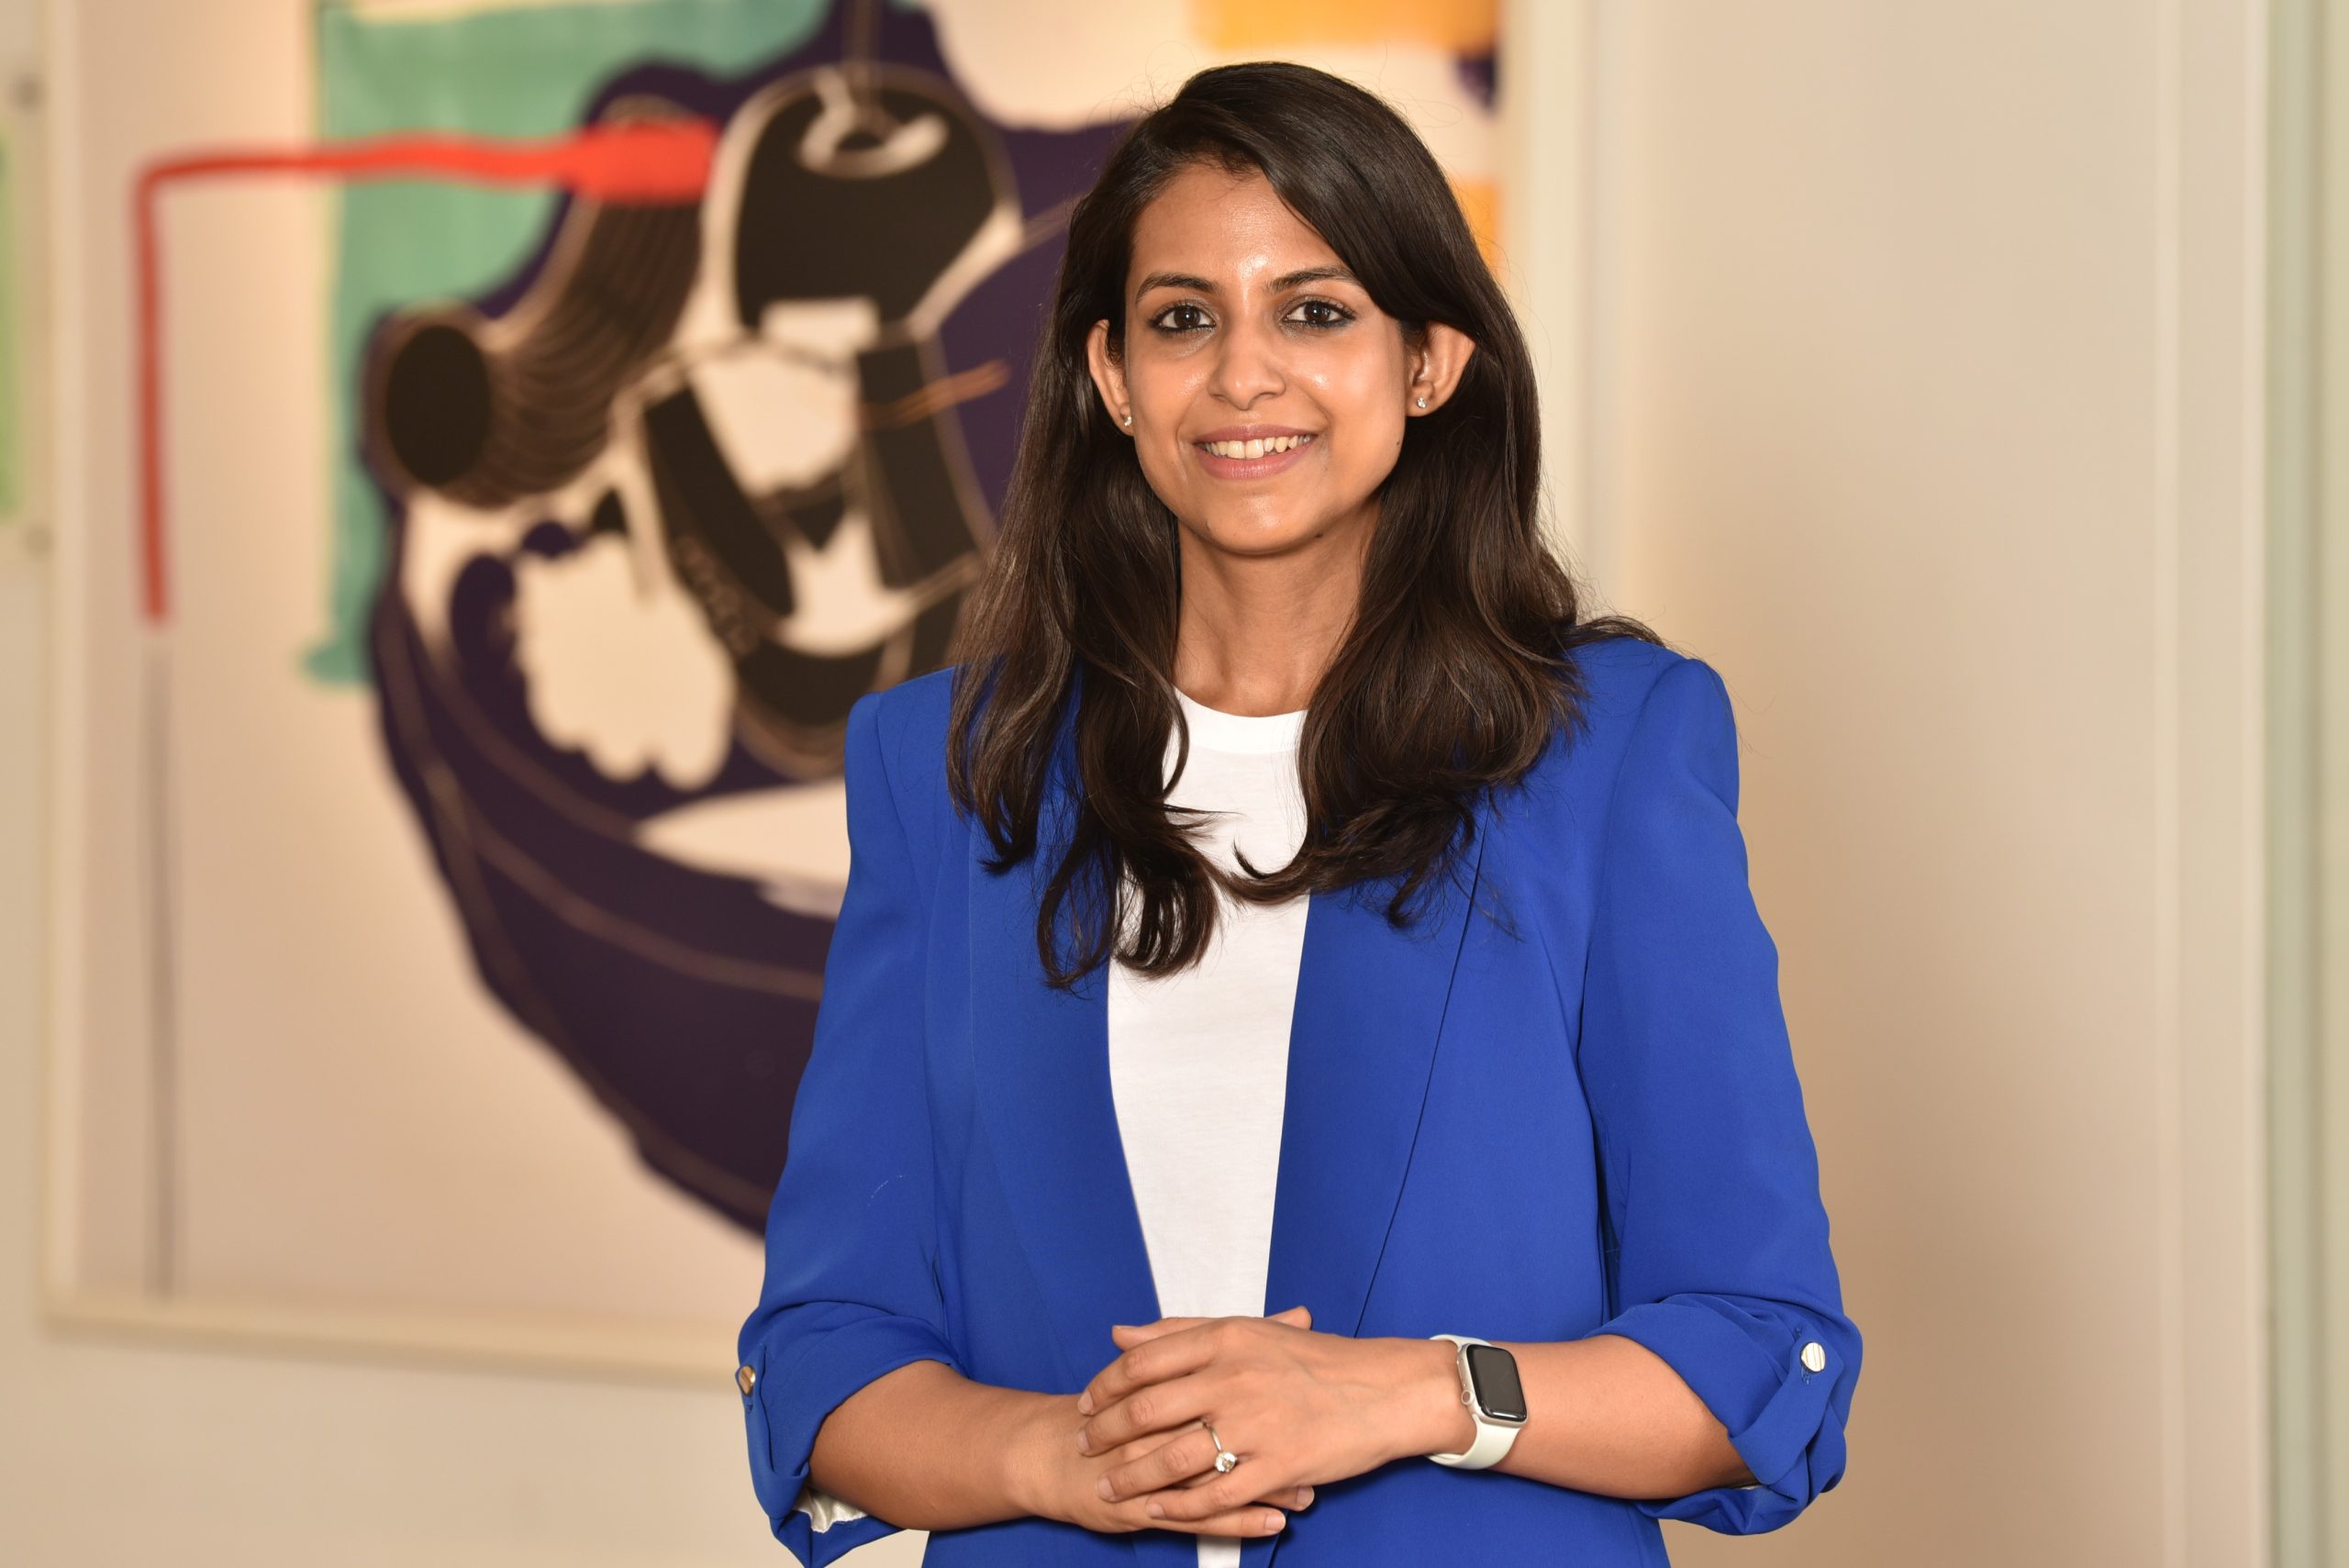 Meesho digitises over 30000 small businesses from West Bengal ropes in Sourav Ganguly ahead of the festive season says Megha Agarwal, CXO, Growth at Meesho